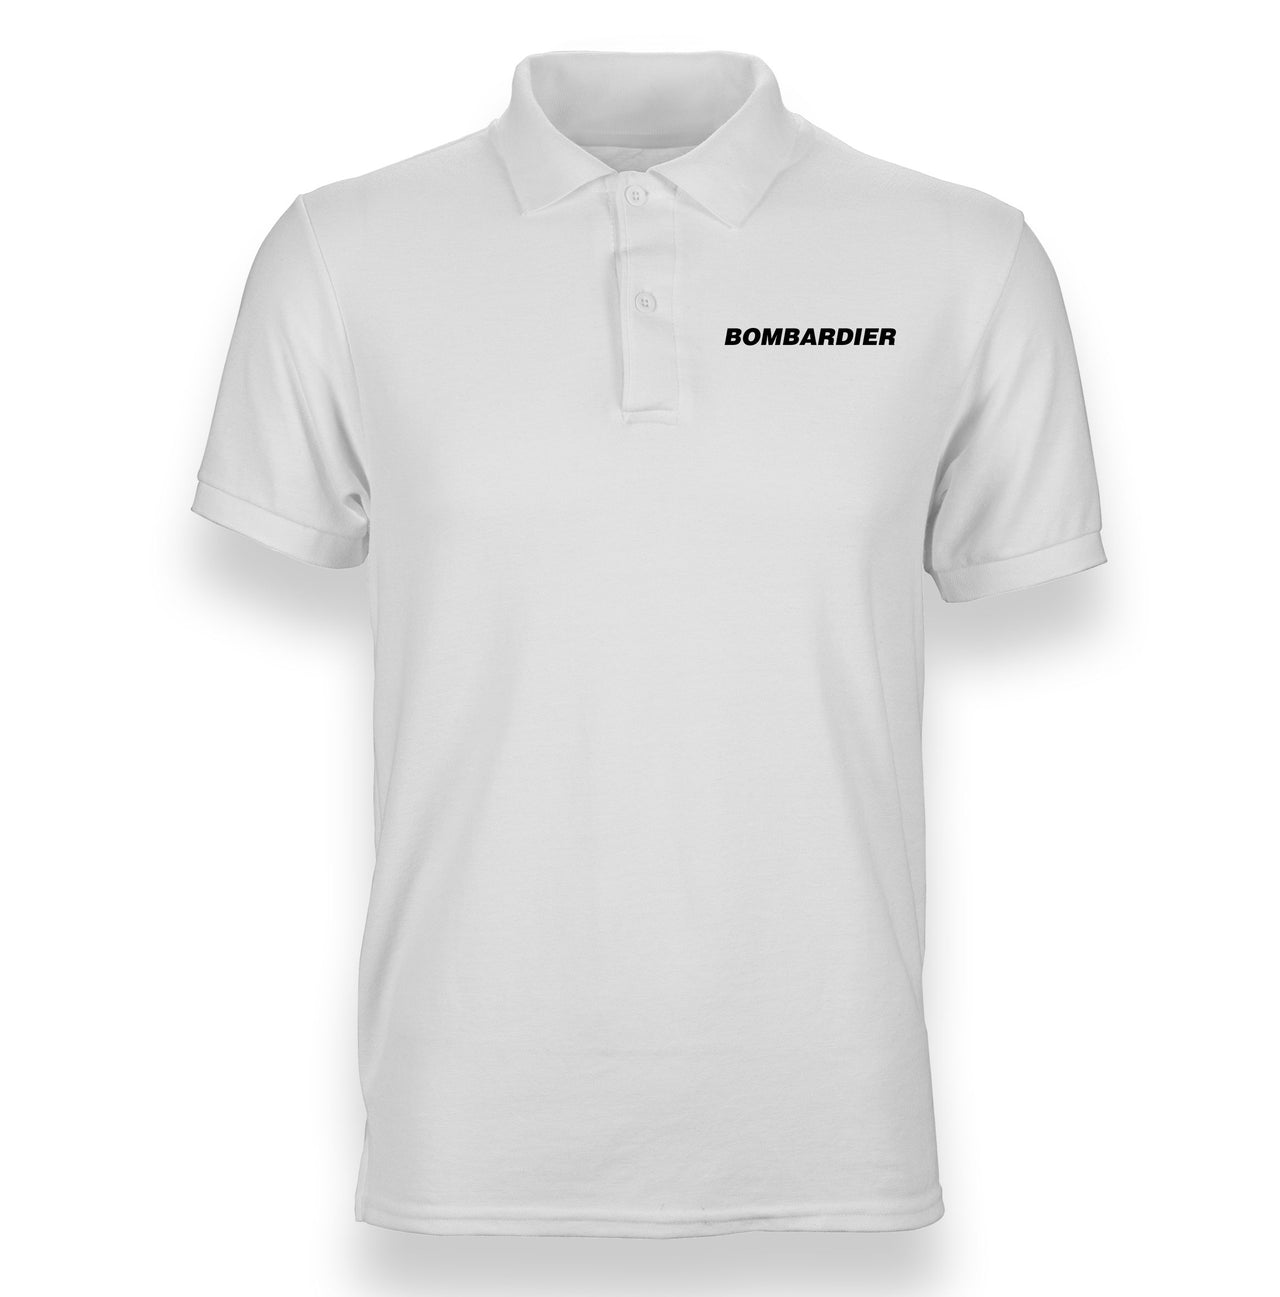 Bombardier & Text Designed Polo T-Shirts